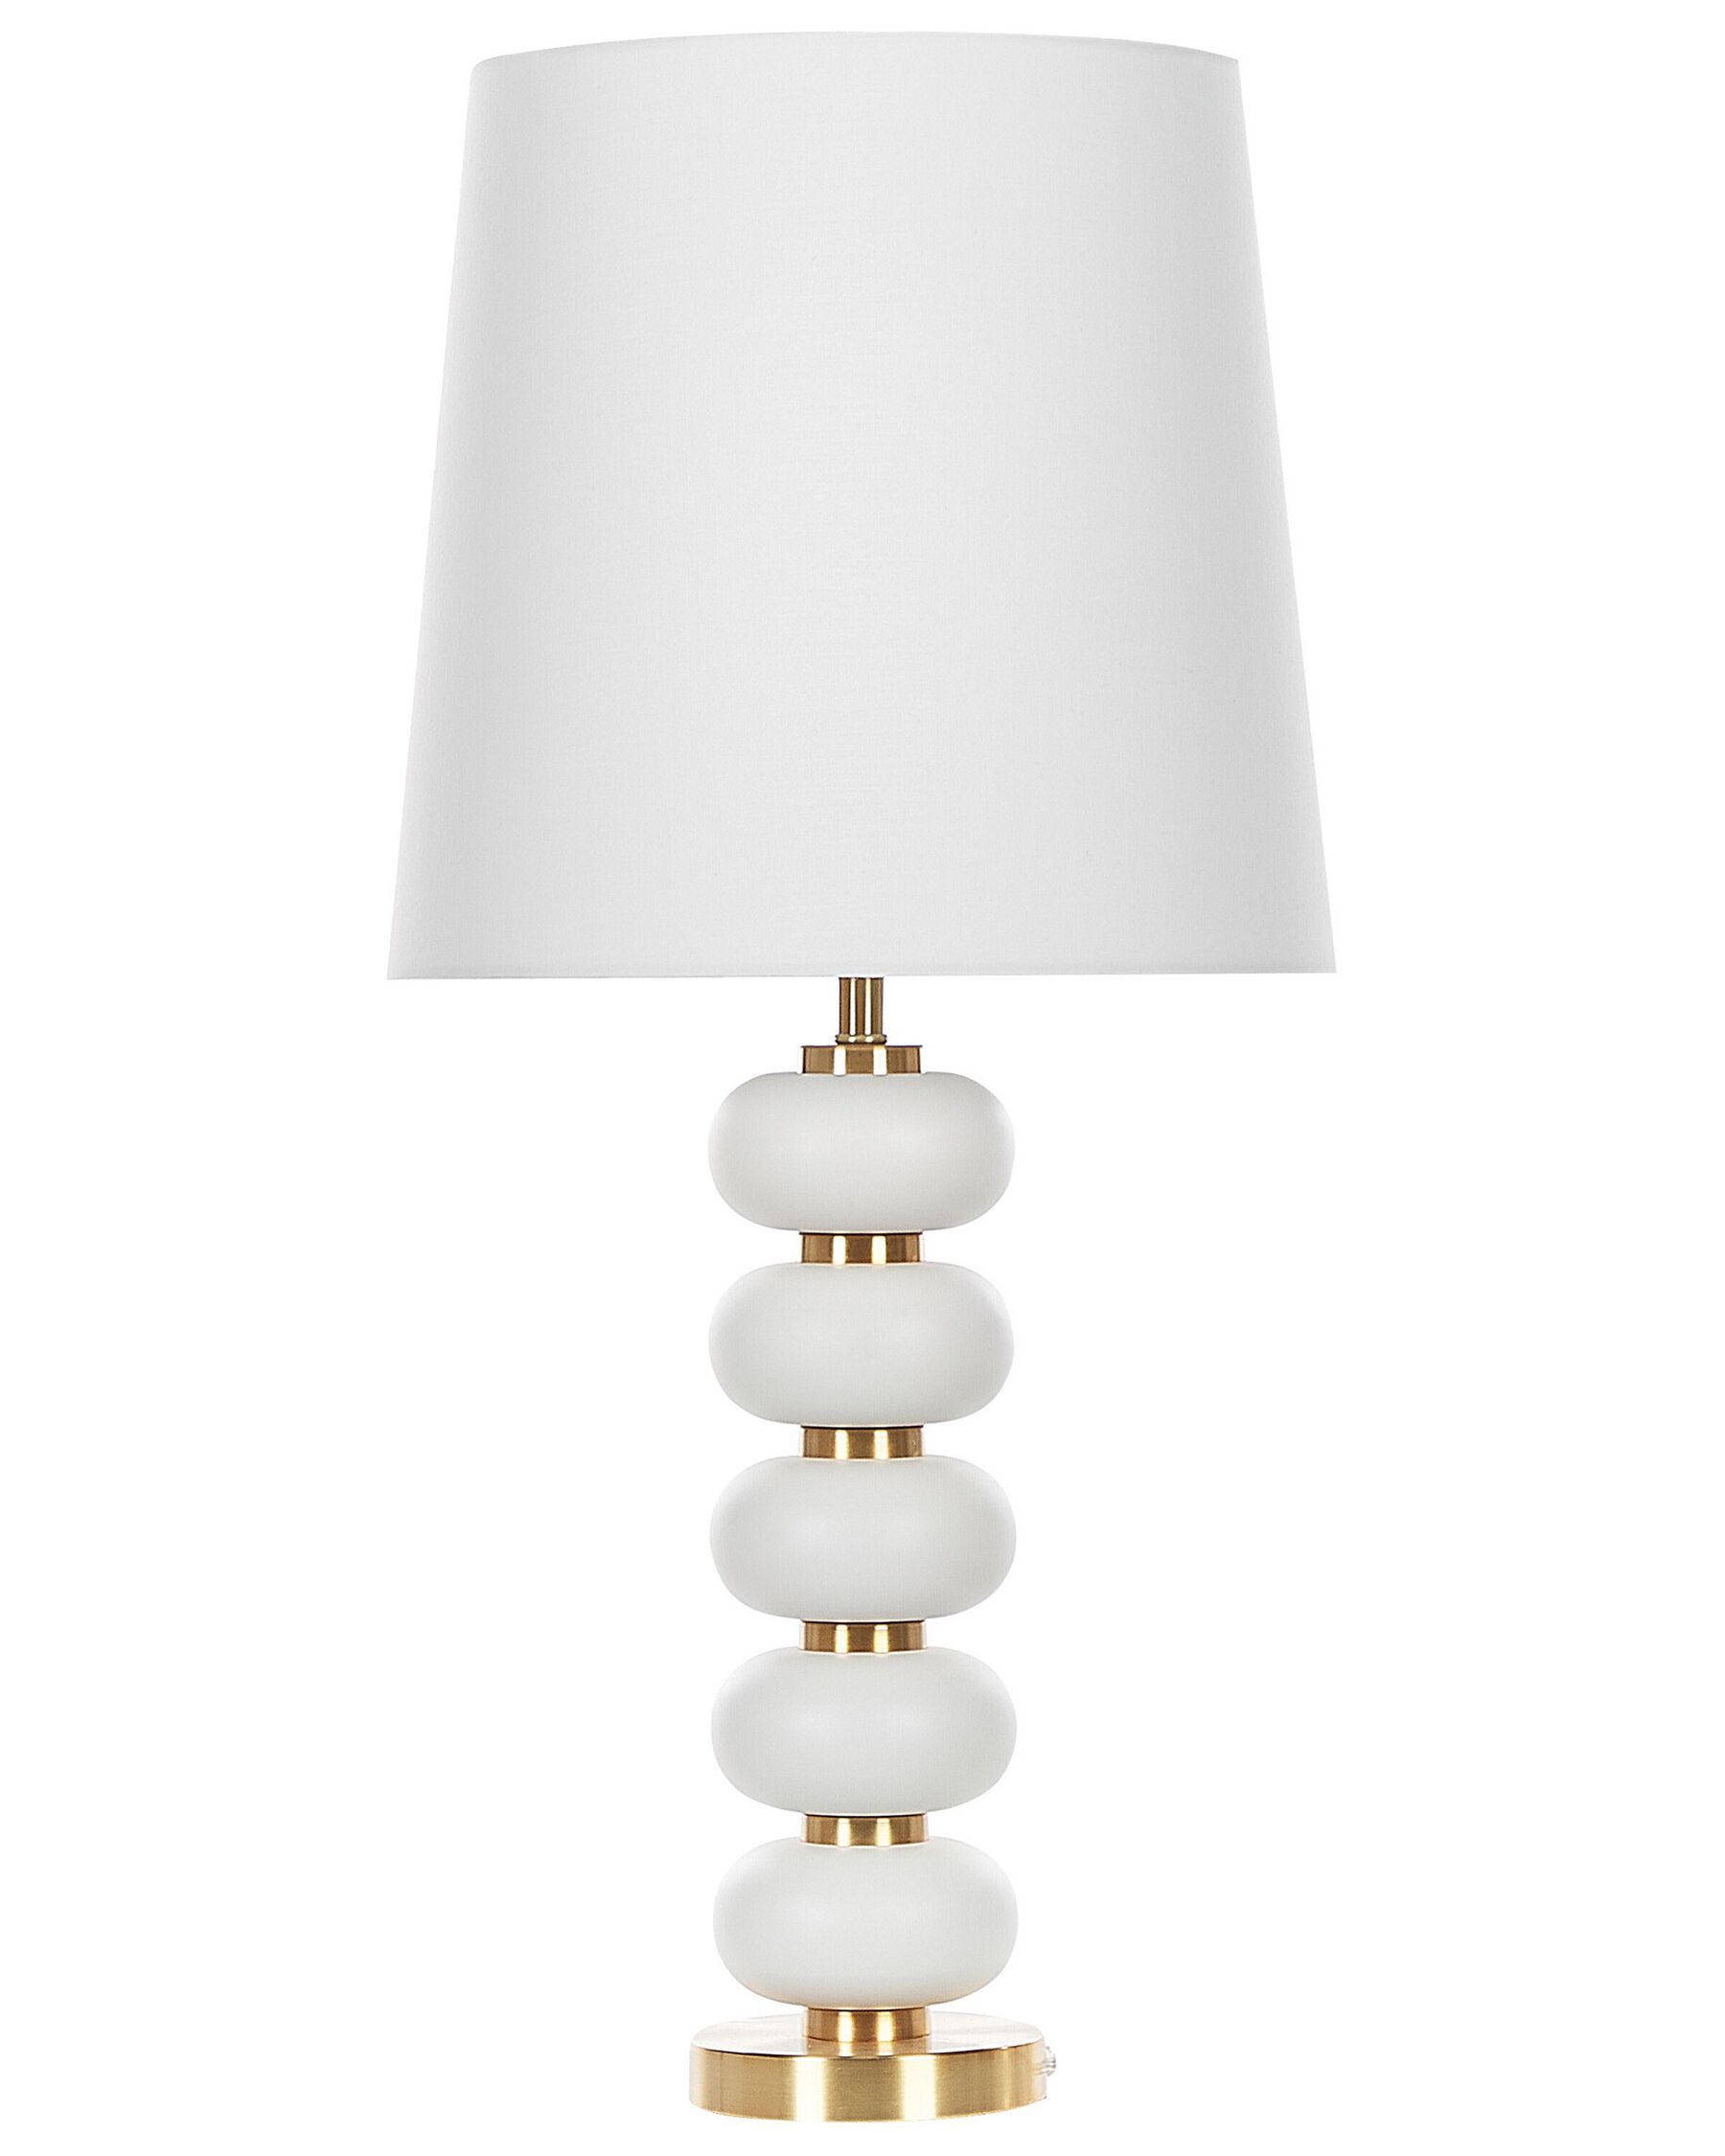 Metal Table Lamp White and Gold FRIO_823026